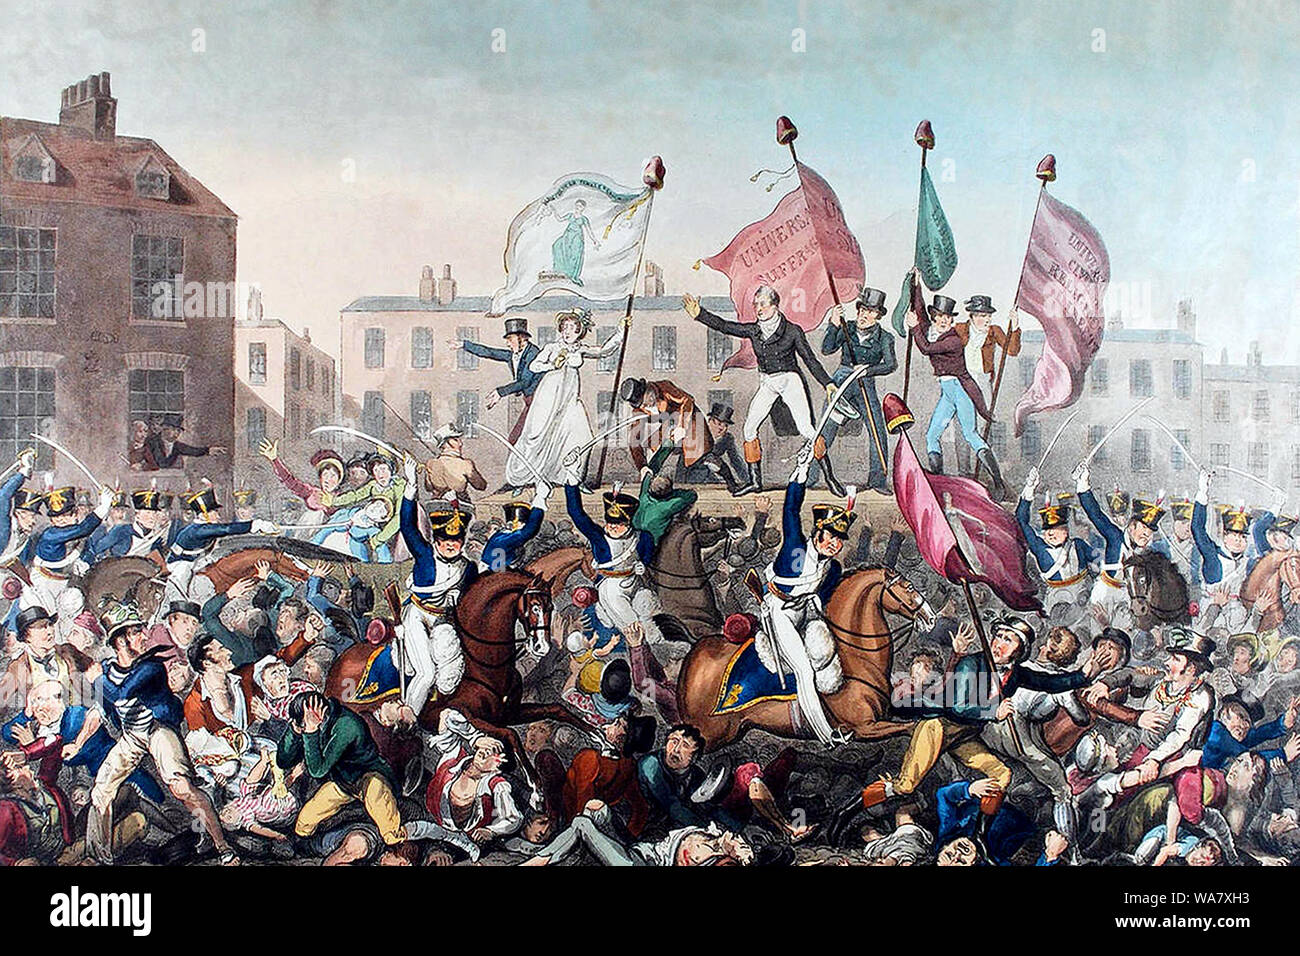 The Peterloo Massacre at St Peter's Field, Manchester, Lancashire, England, 16 August 1819 when cavalry charged into a crowd of 60,000–80,000 who had gathered to demand the reform of parliamentary representation Stock Photo